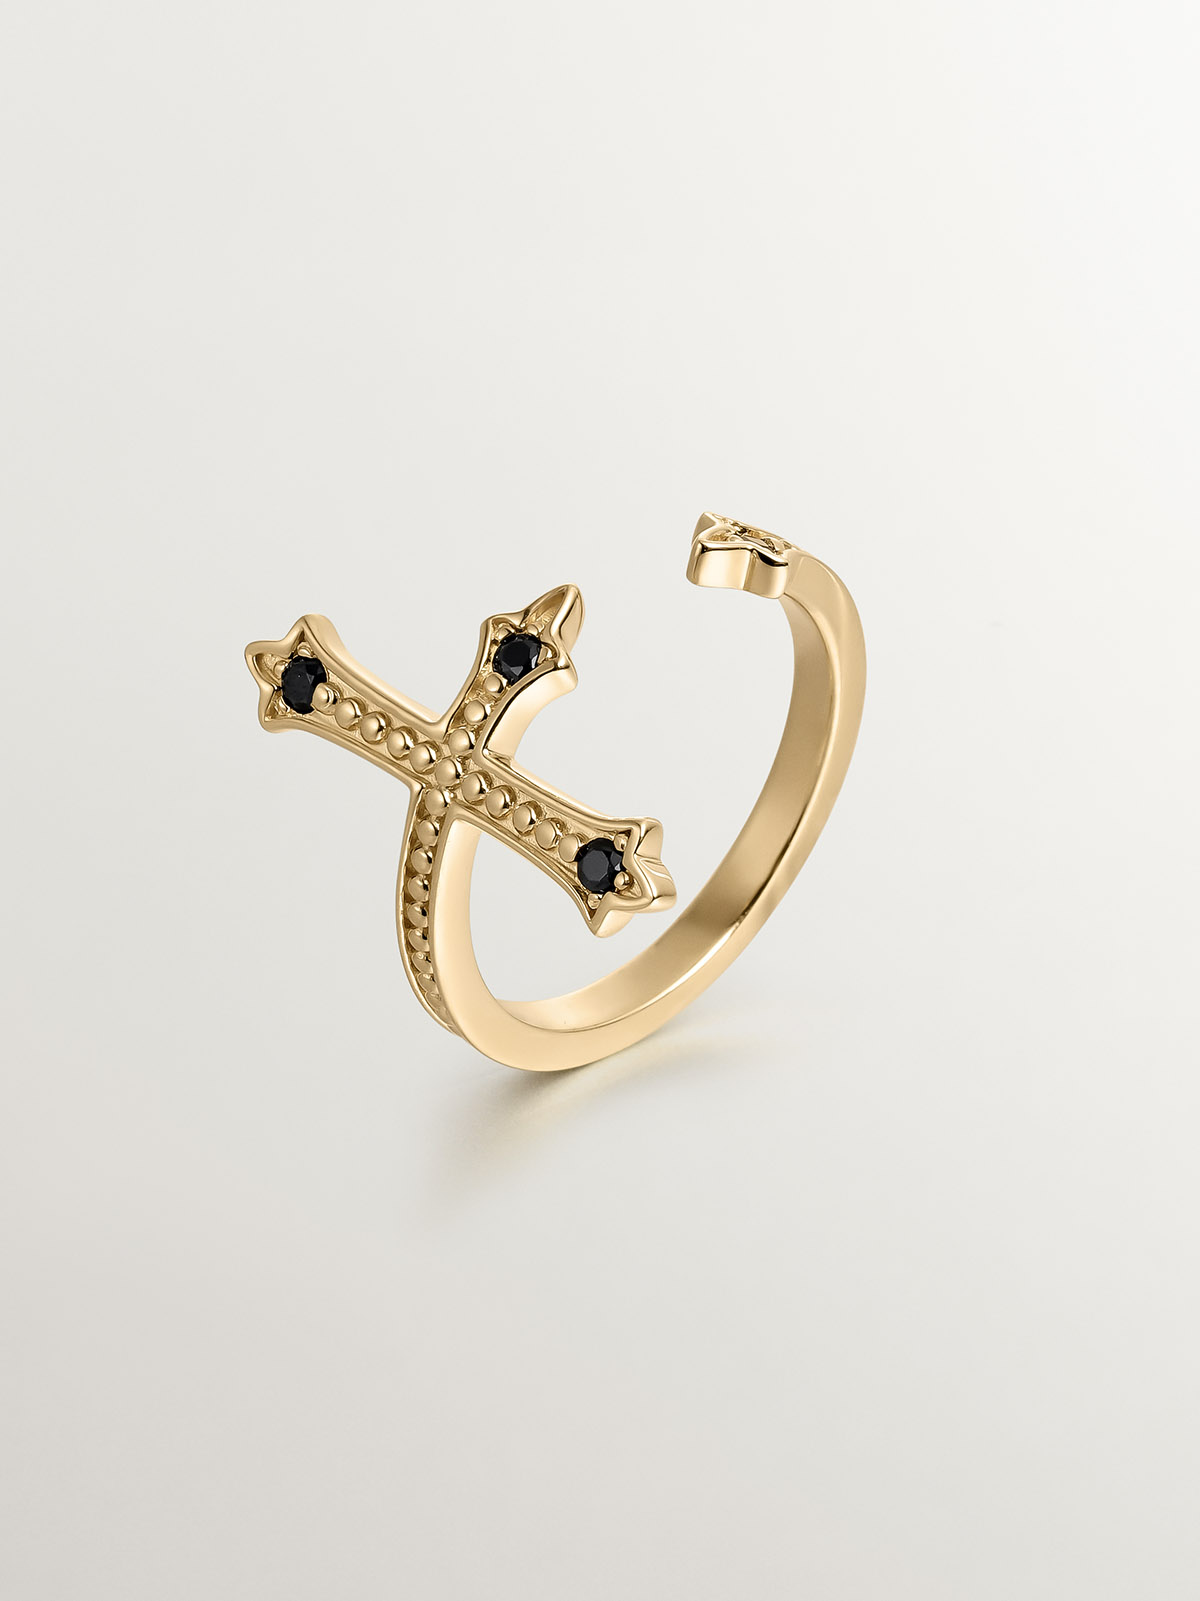 You and Me ring made of 925 silver, bathed in 18K yellow gold, cross-shaped with black spinels.